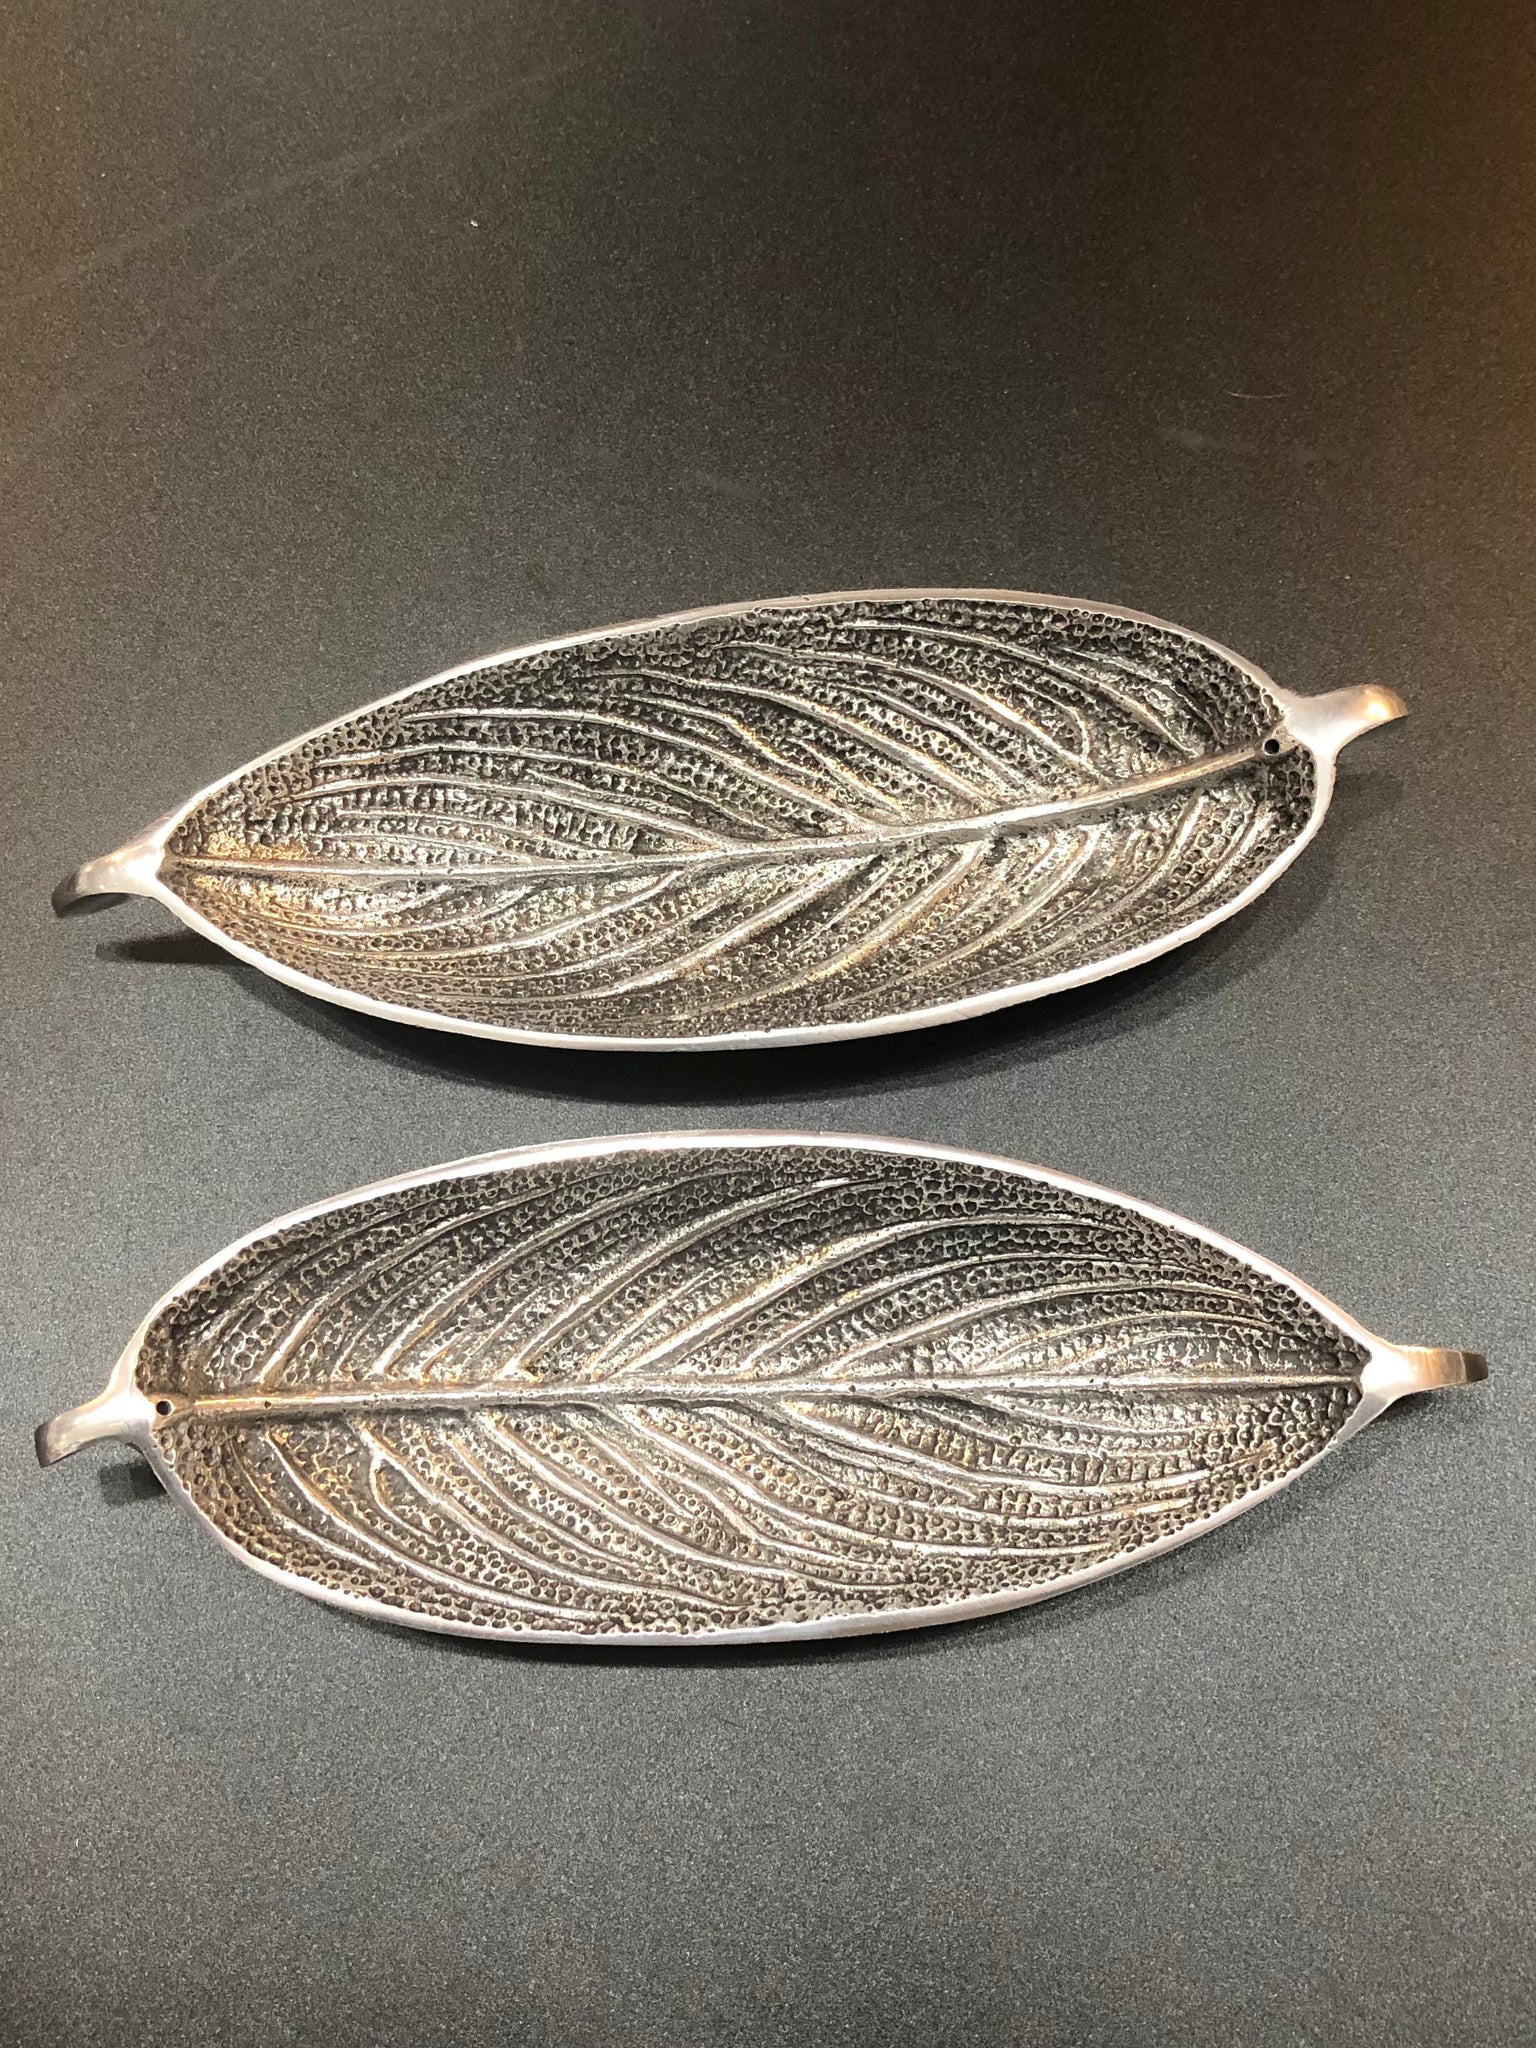 Leaf Incense Plate - The Pearl of Door County